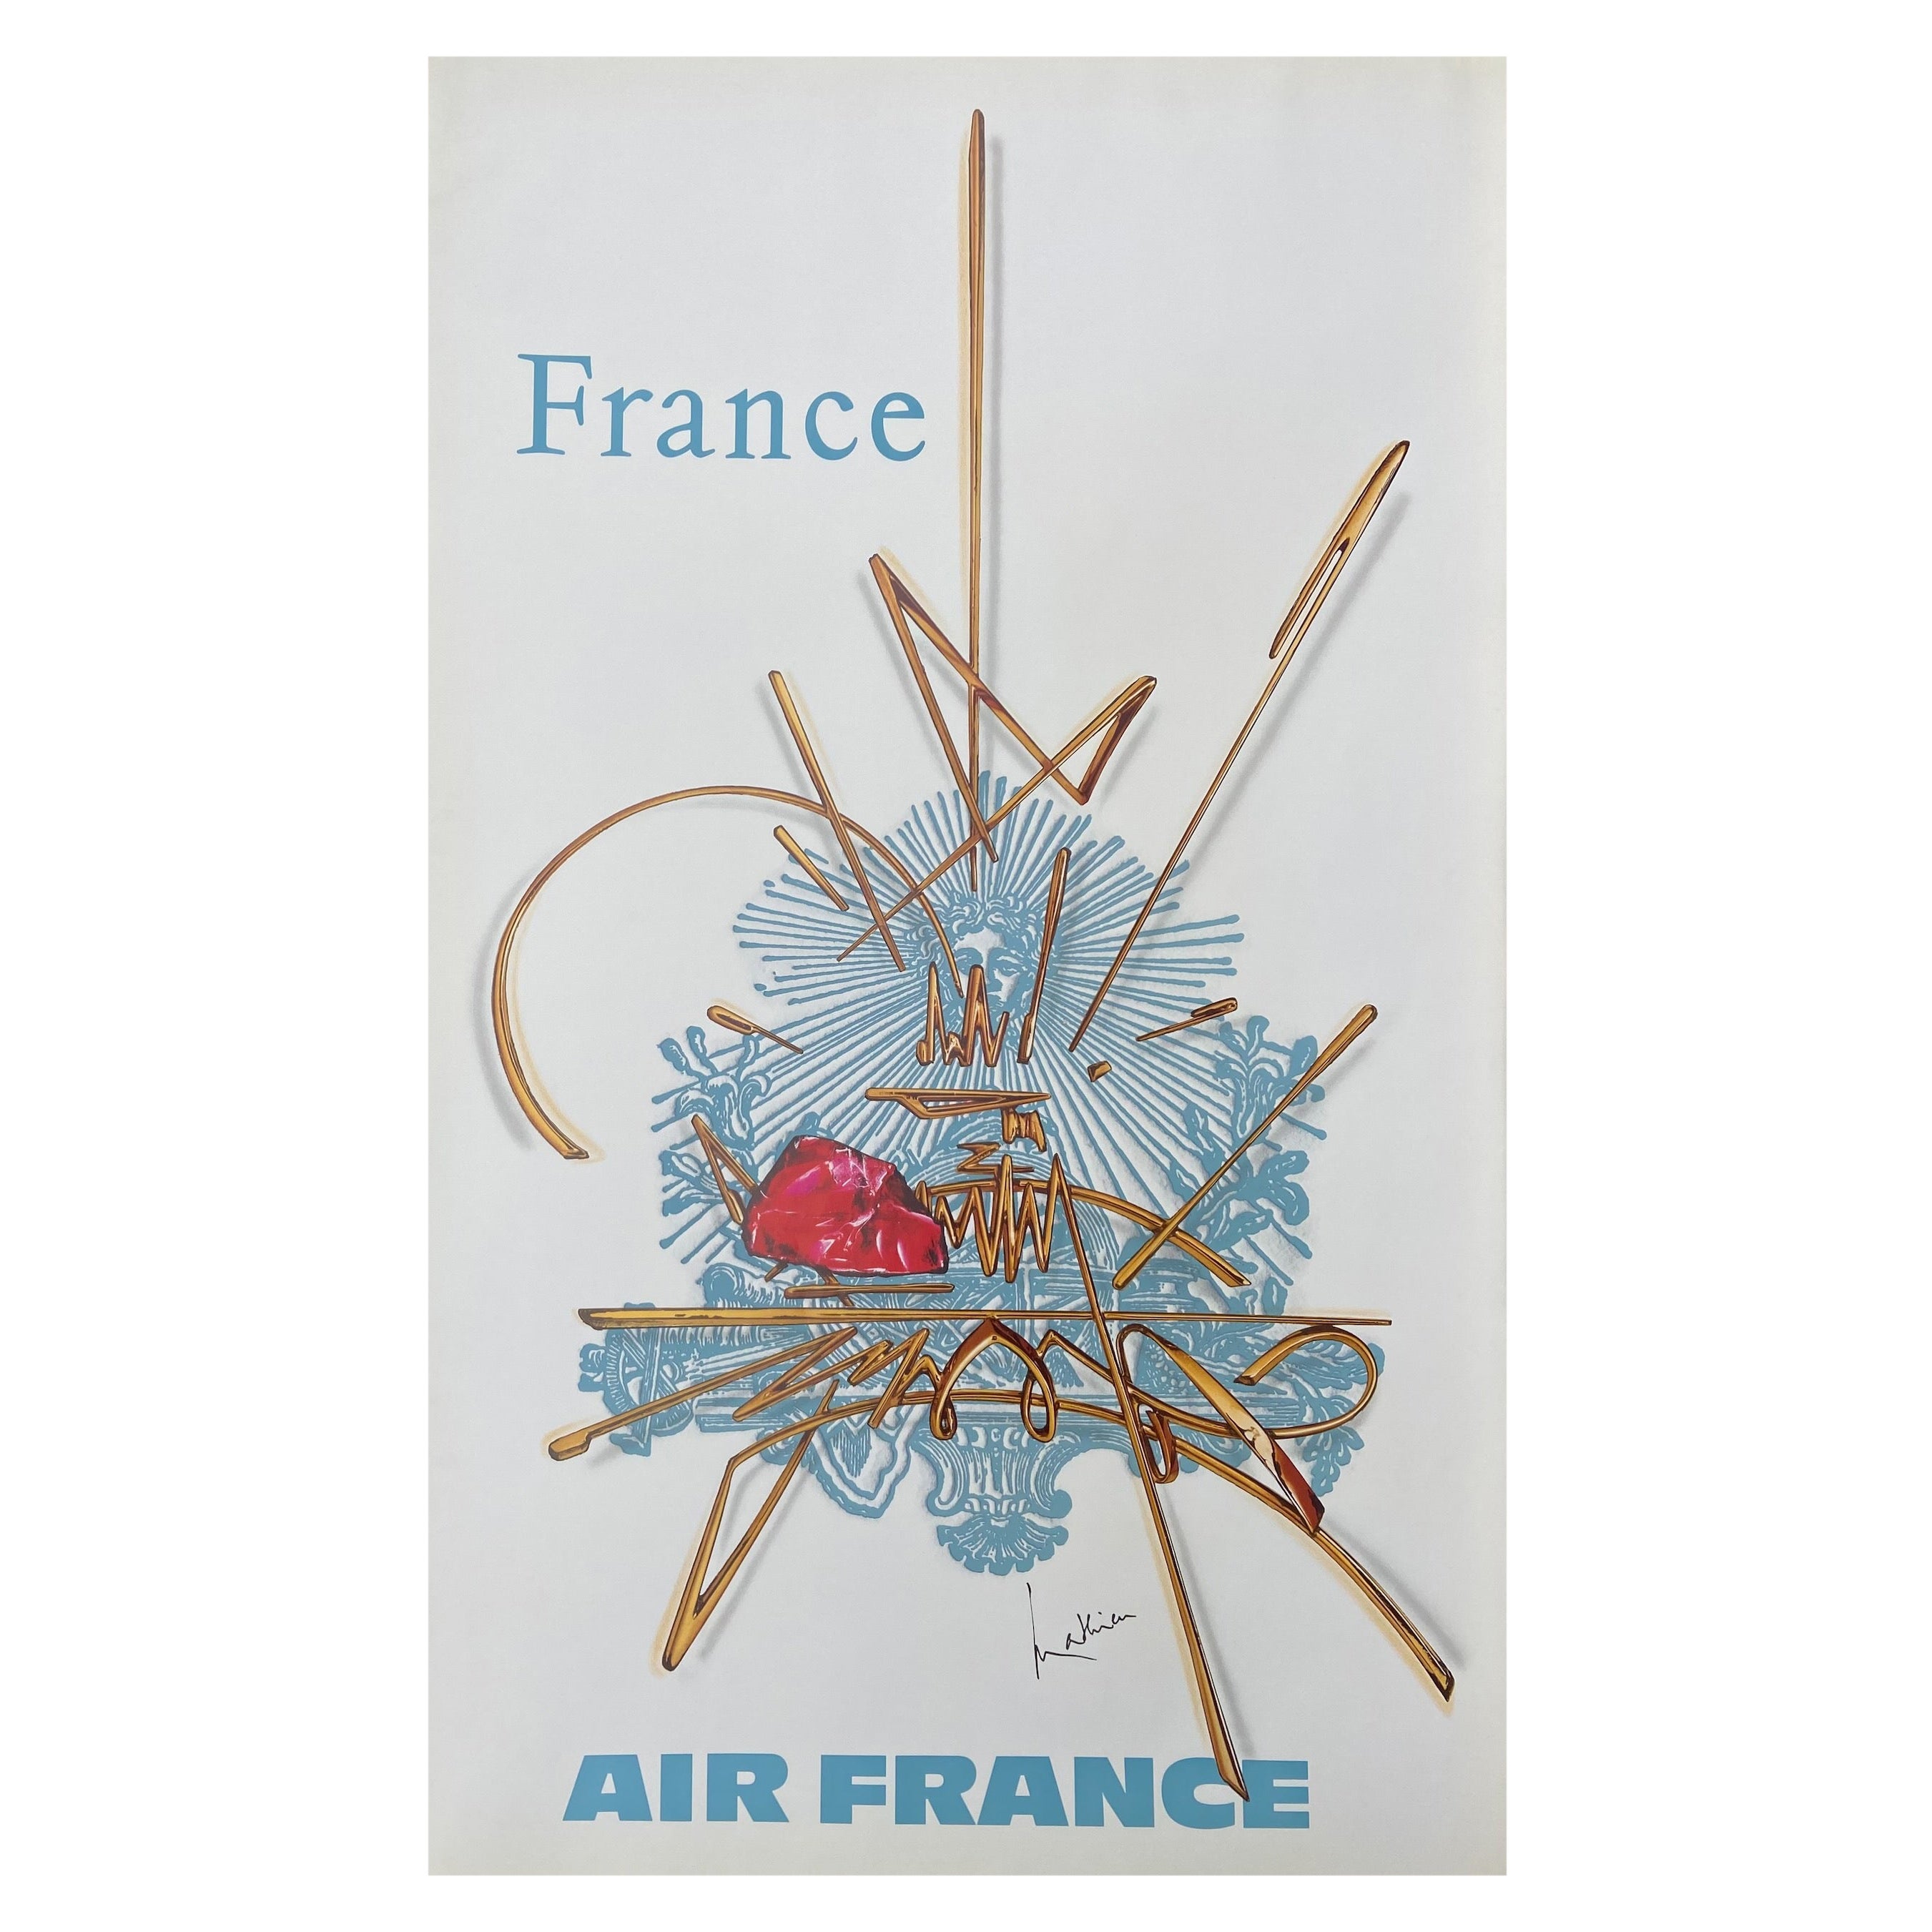 Full Portfolio 14 Air France Posters by Georges Mathieu, 1968 For Sale